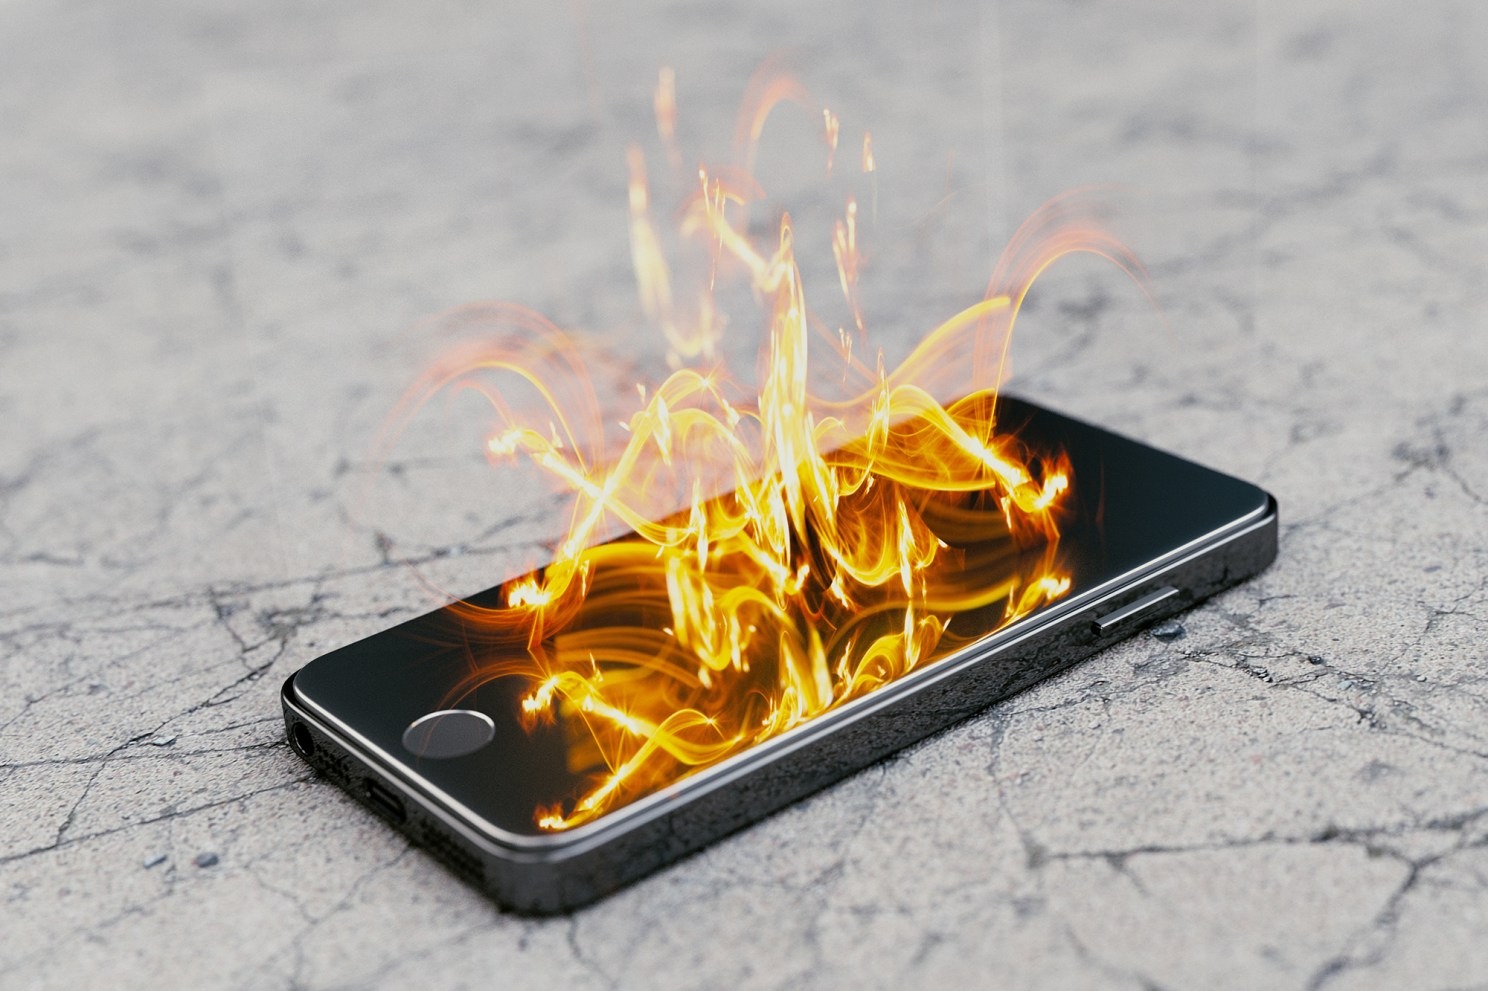 should-you-be-worried-about-your-iphone-exploding